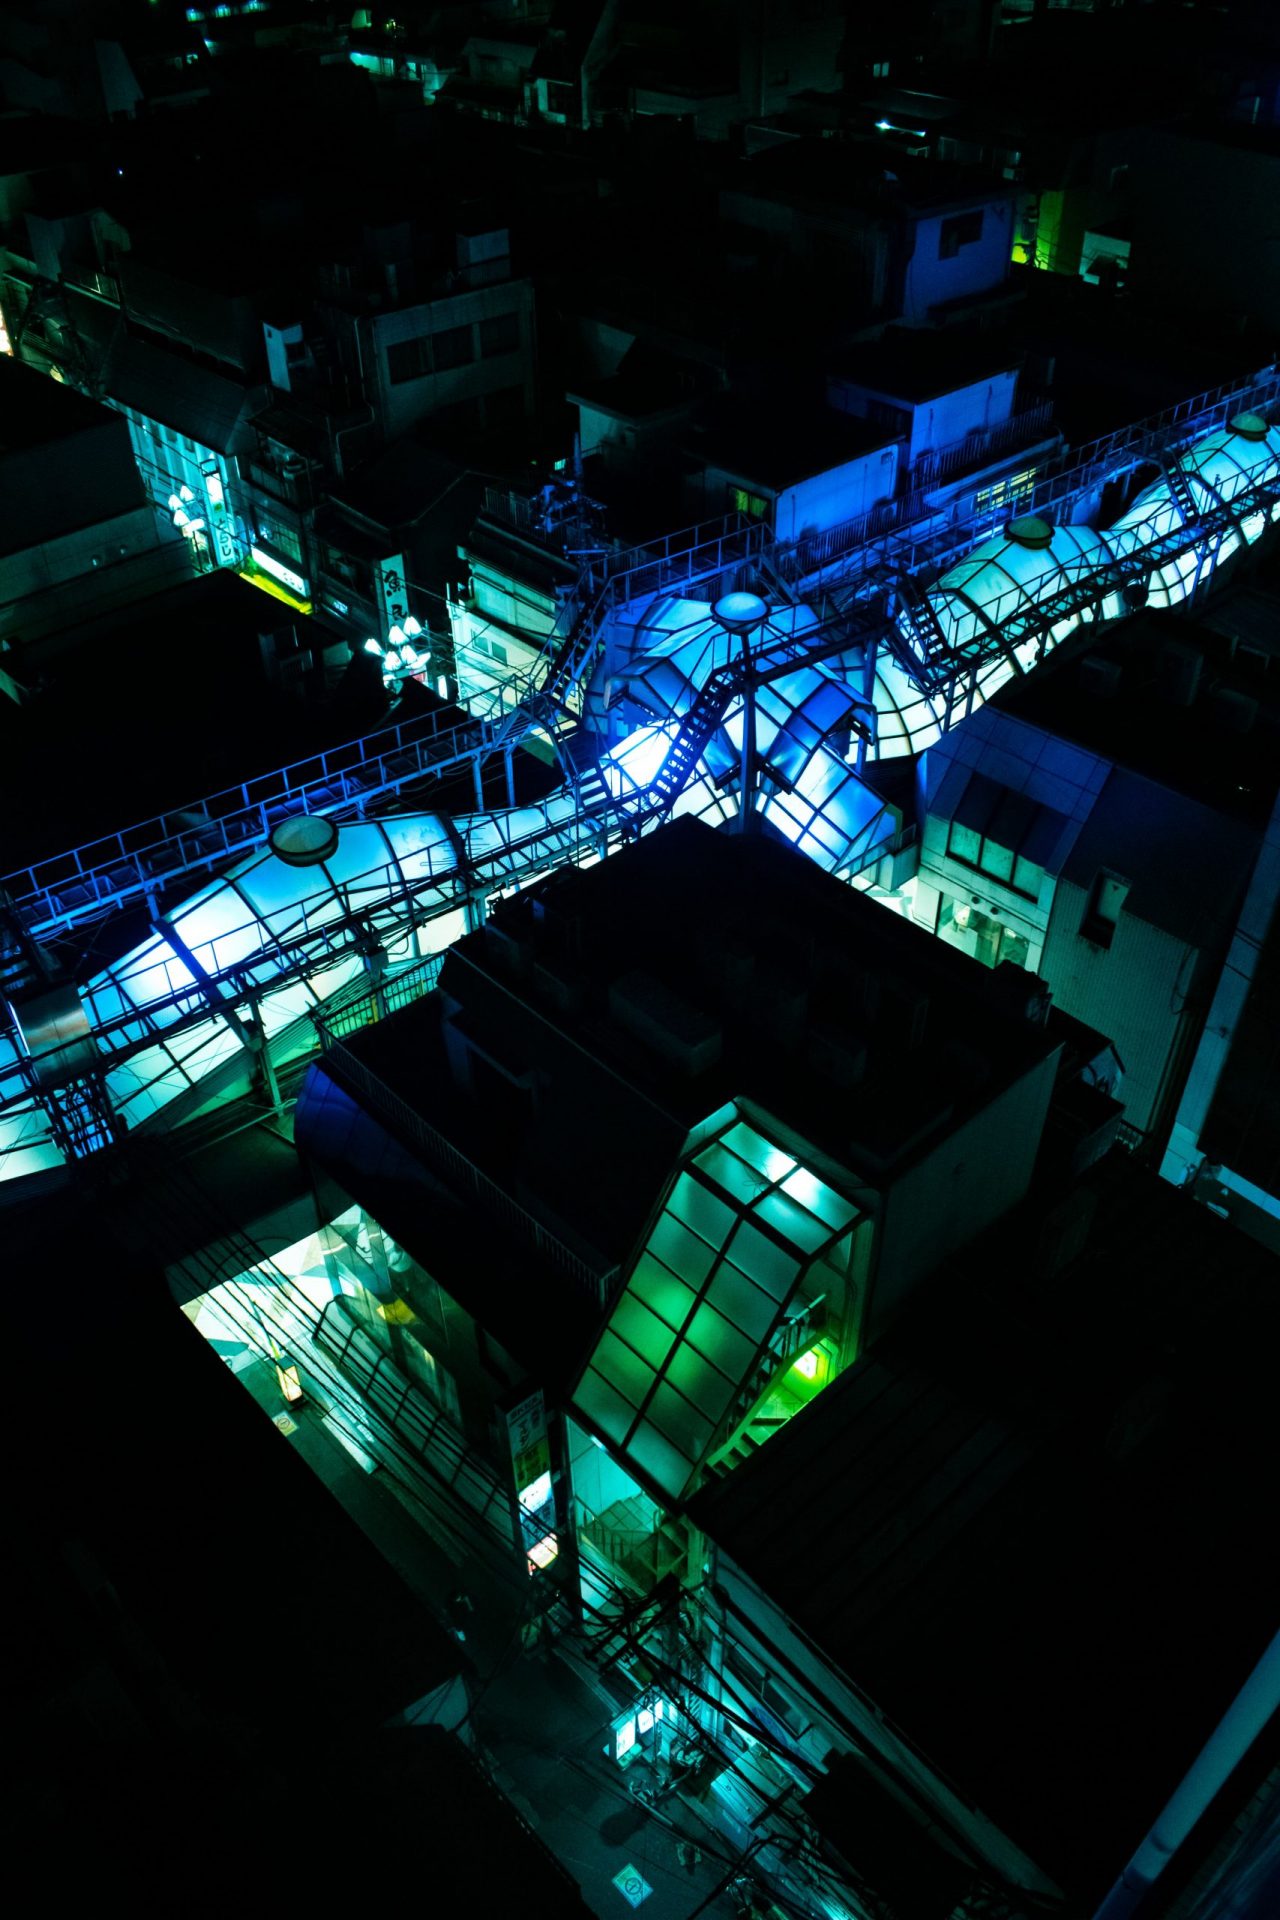 Sneaking on rooftops in Nakano